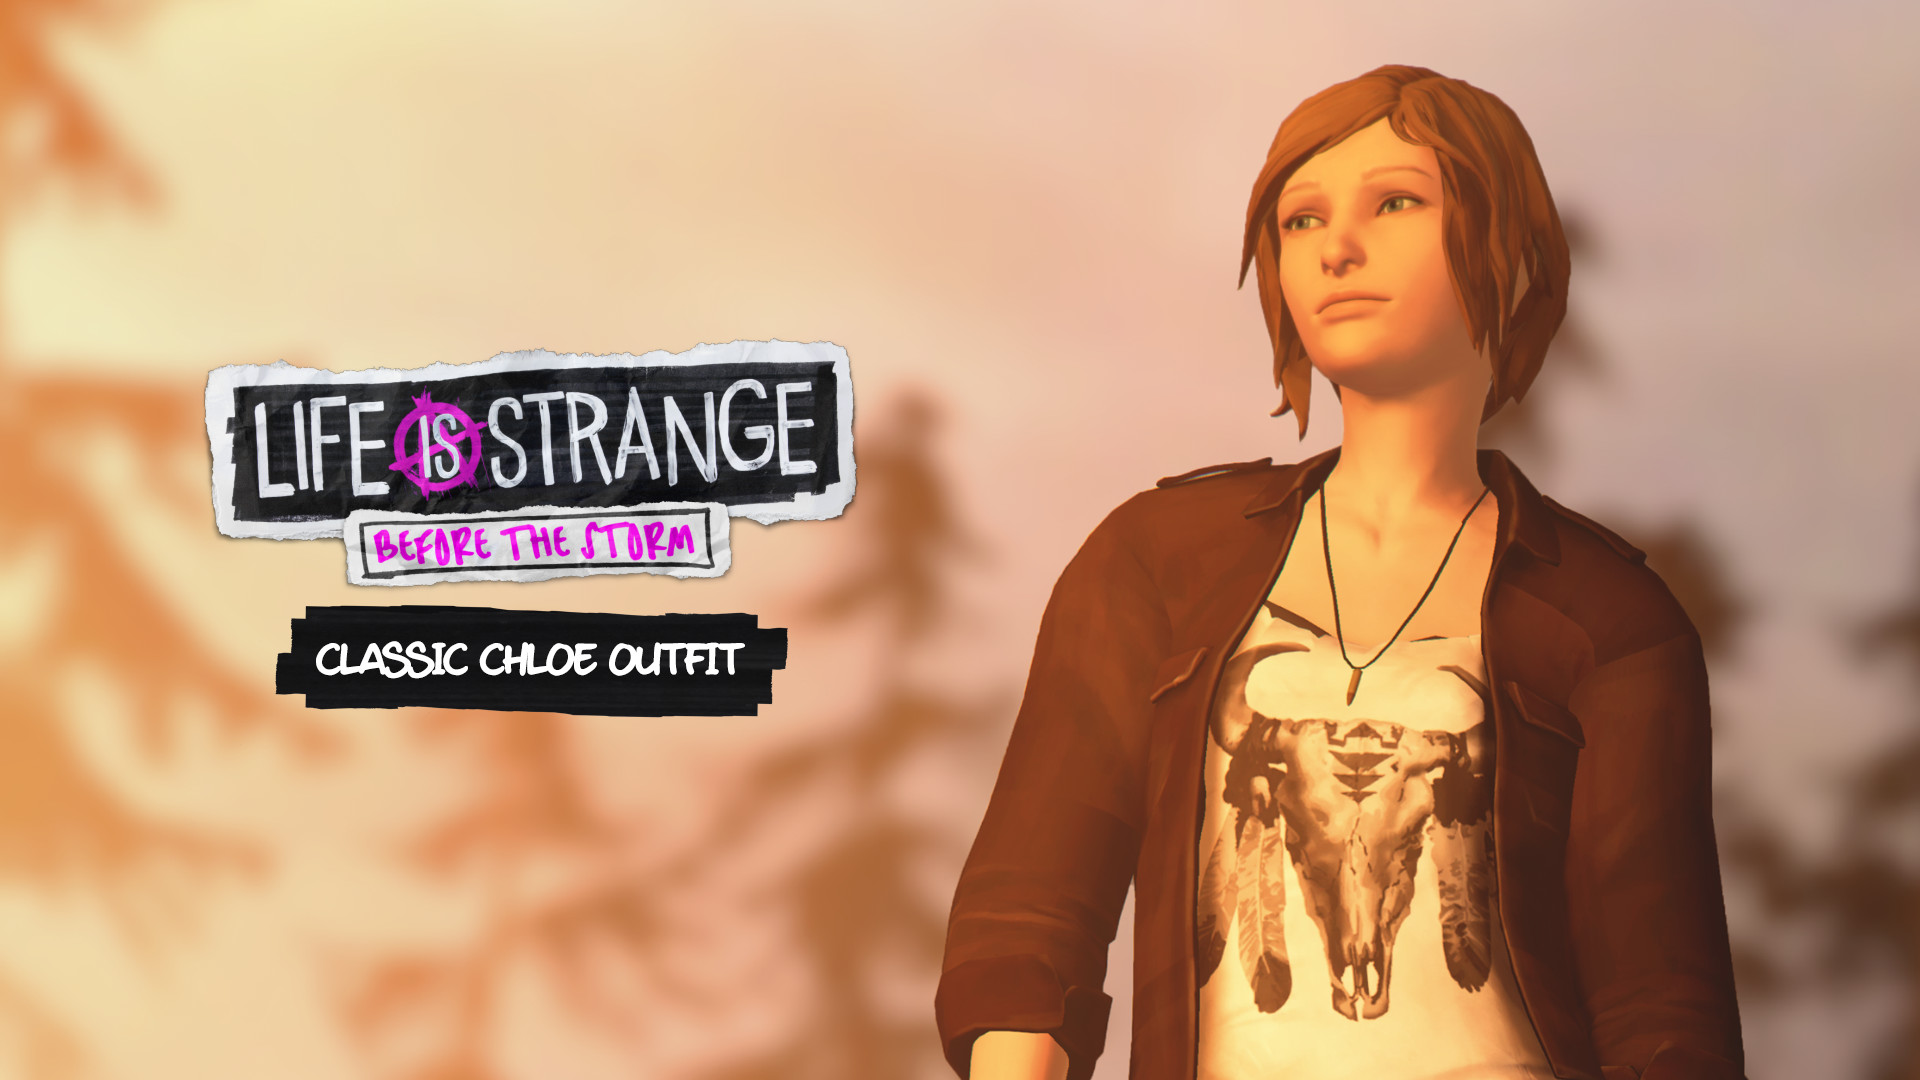 Life is Strange: Before the Storm Classic Chloe Outfit Pack Featured Screenshot #1